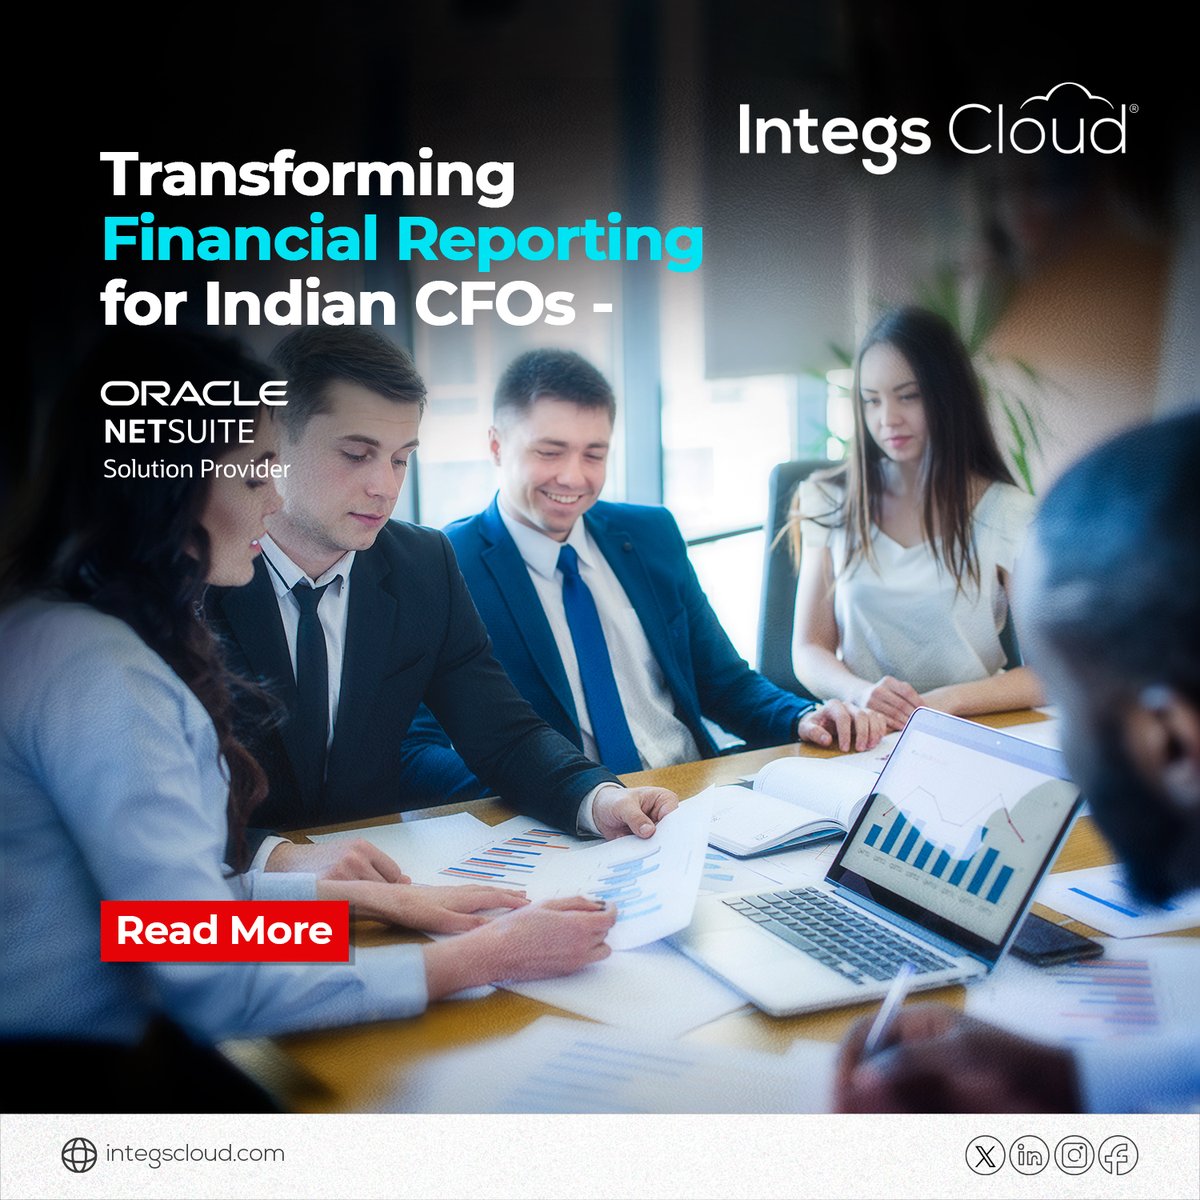 Navigate Indian finance with ease! Discover Oracle NetSuite's essential reports for CFOs. From GSTR1 to TDS compliance, streamline operations and drive success. 
Learn More - integscloud.com/blog/guide-to-…

#OracleNetSuite #FinancialReporting #IndianFinance #CFOs #CloudERPImplementation